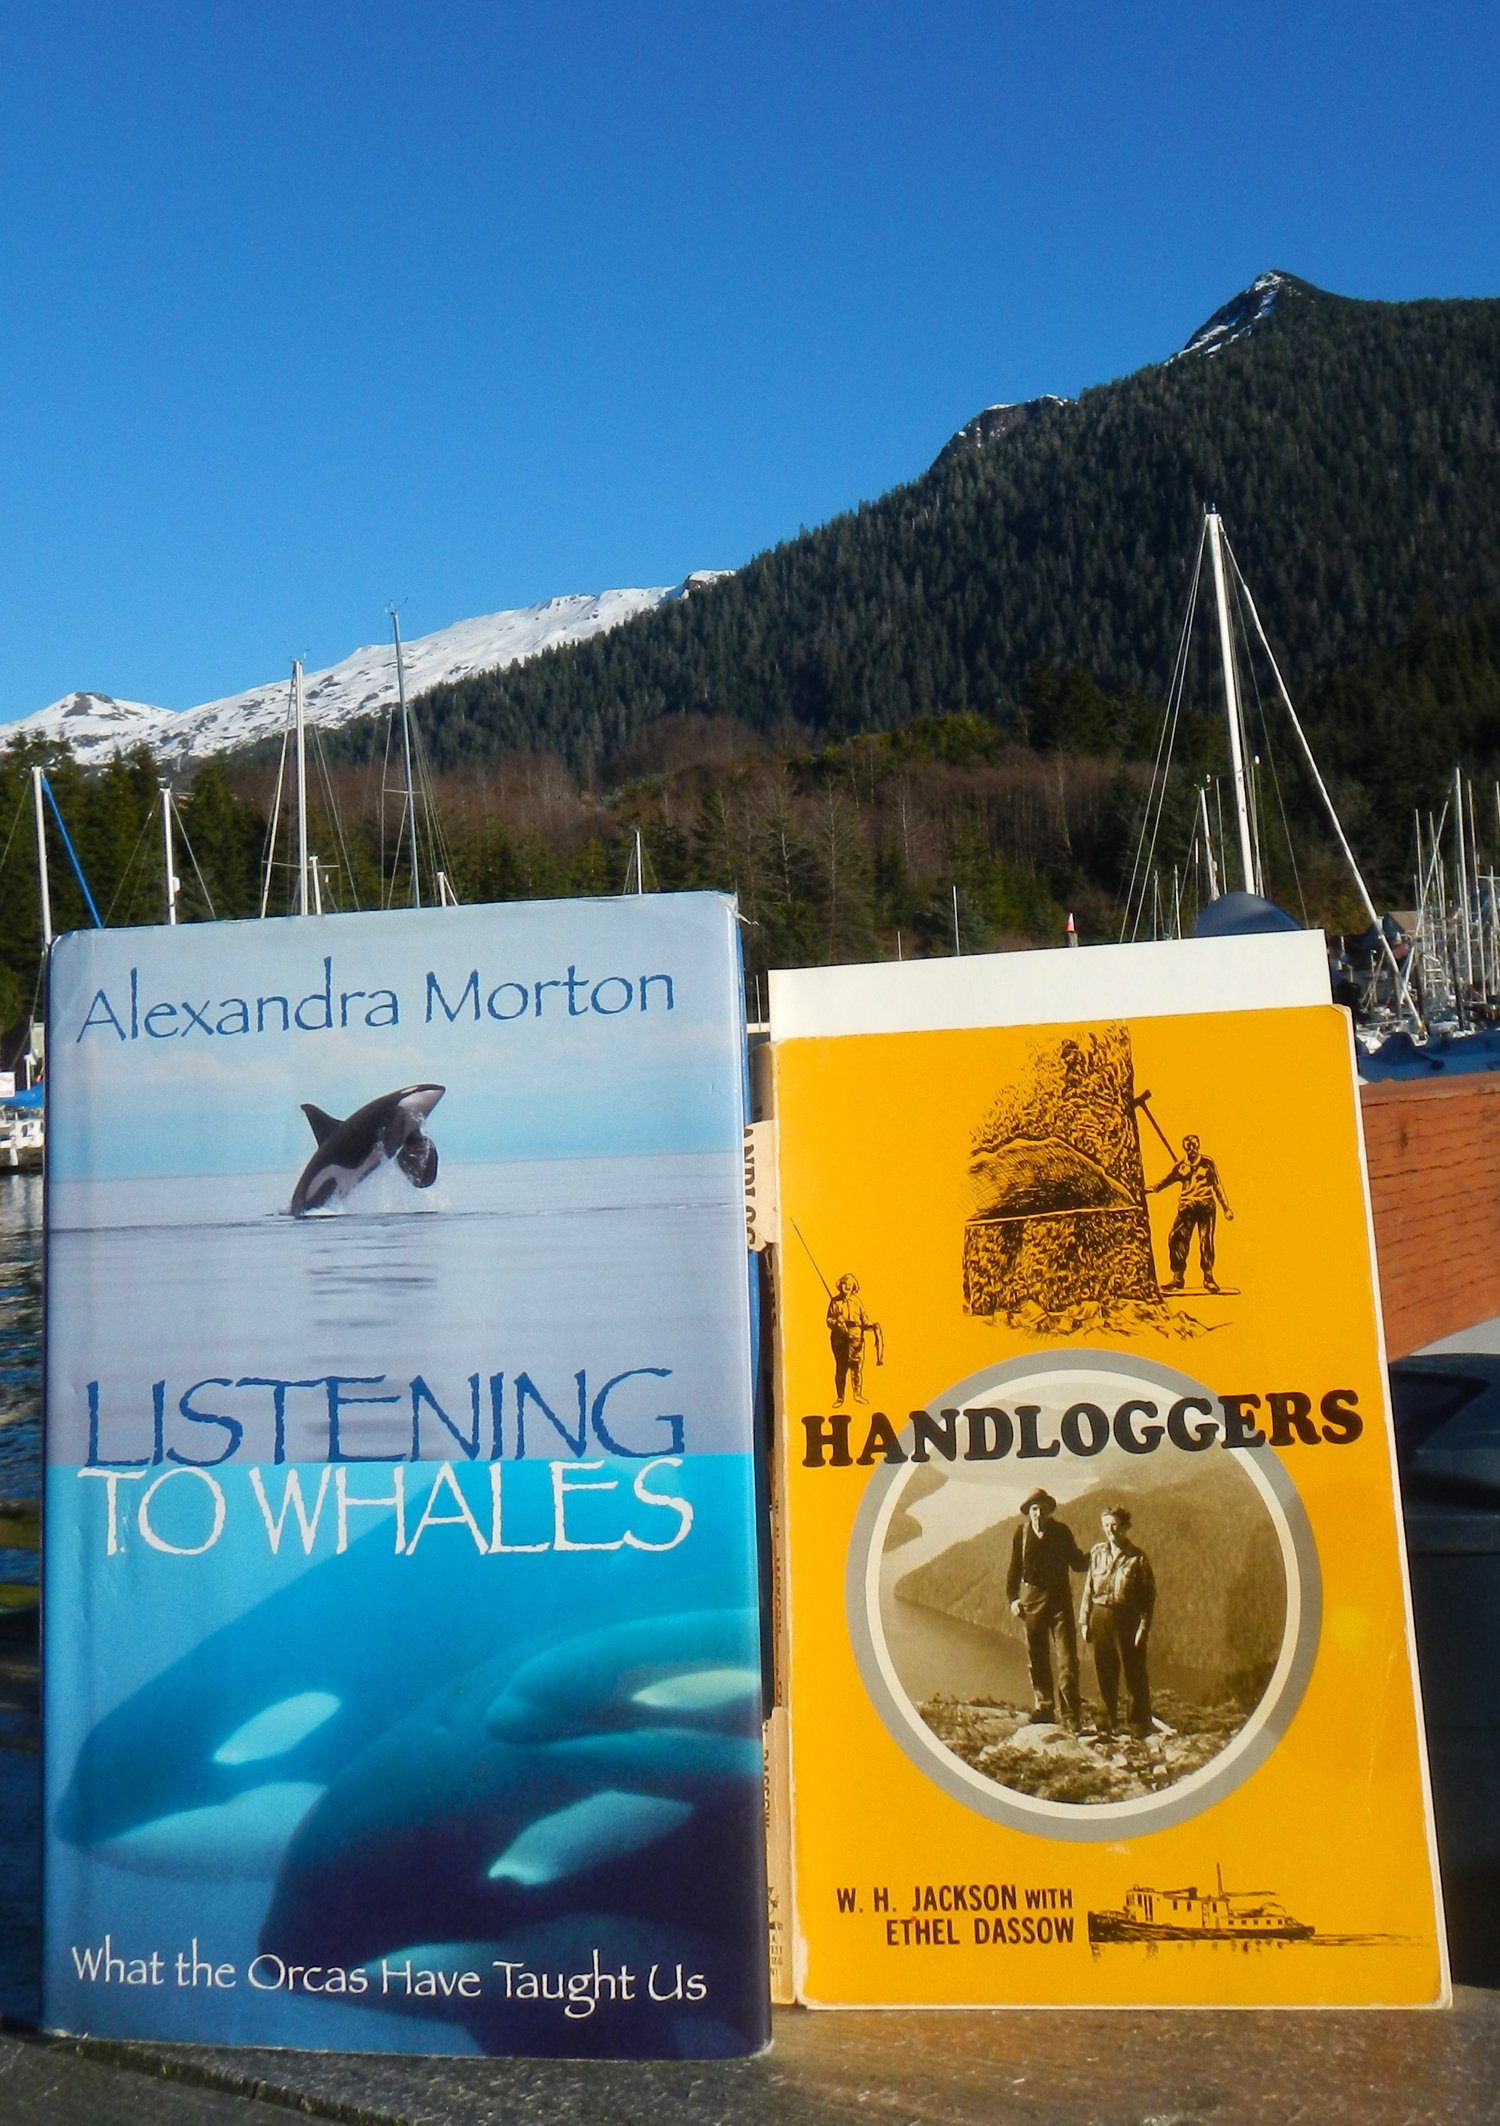  Two of my favorite books ever! Alexandra Morton's Listening to Whales: What the Orcas Have Taught us and W.H Jackson's Handloggers. 